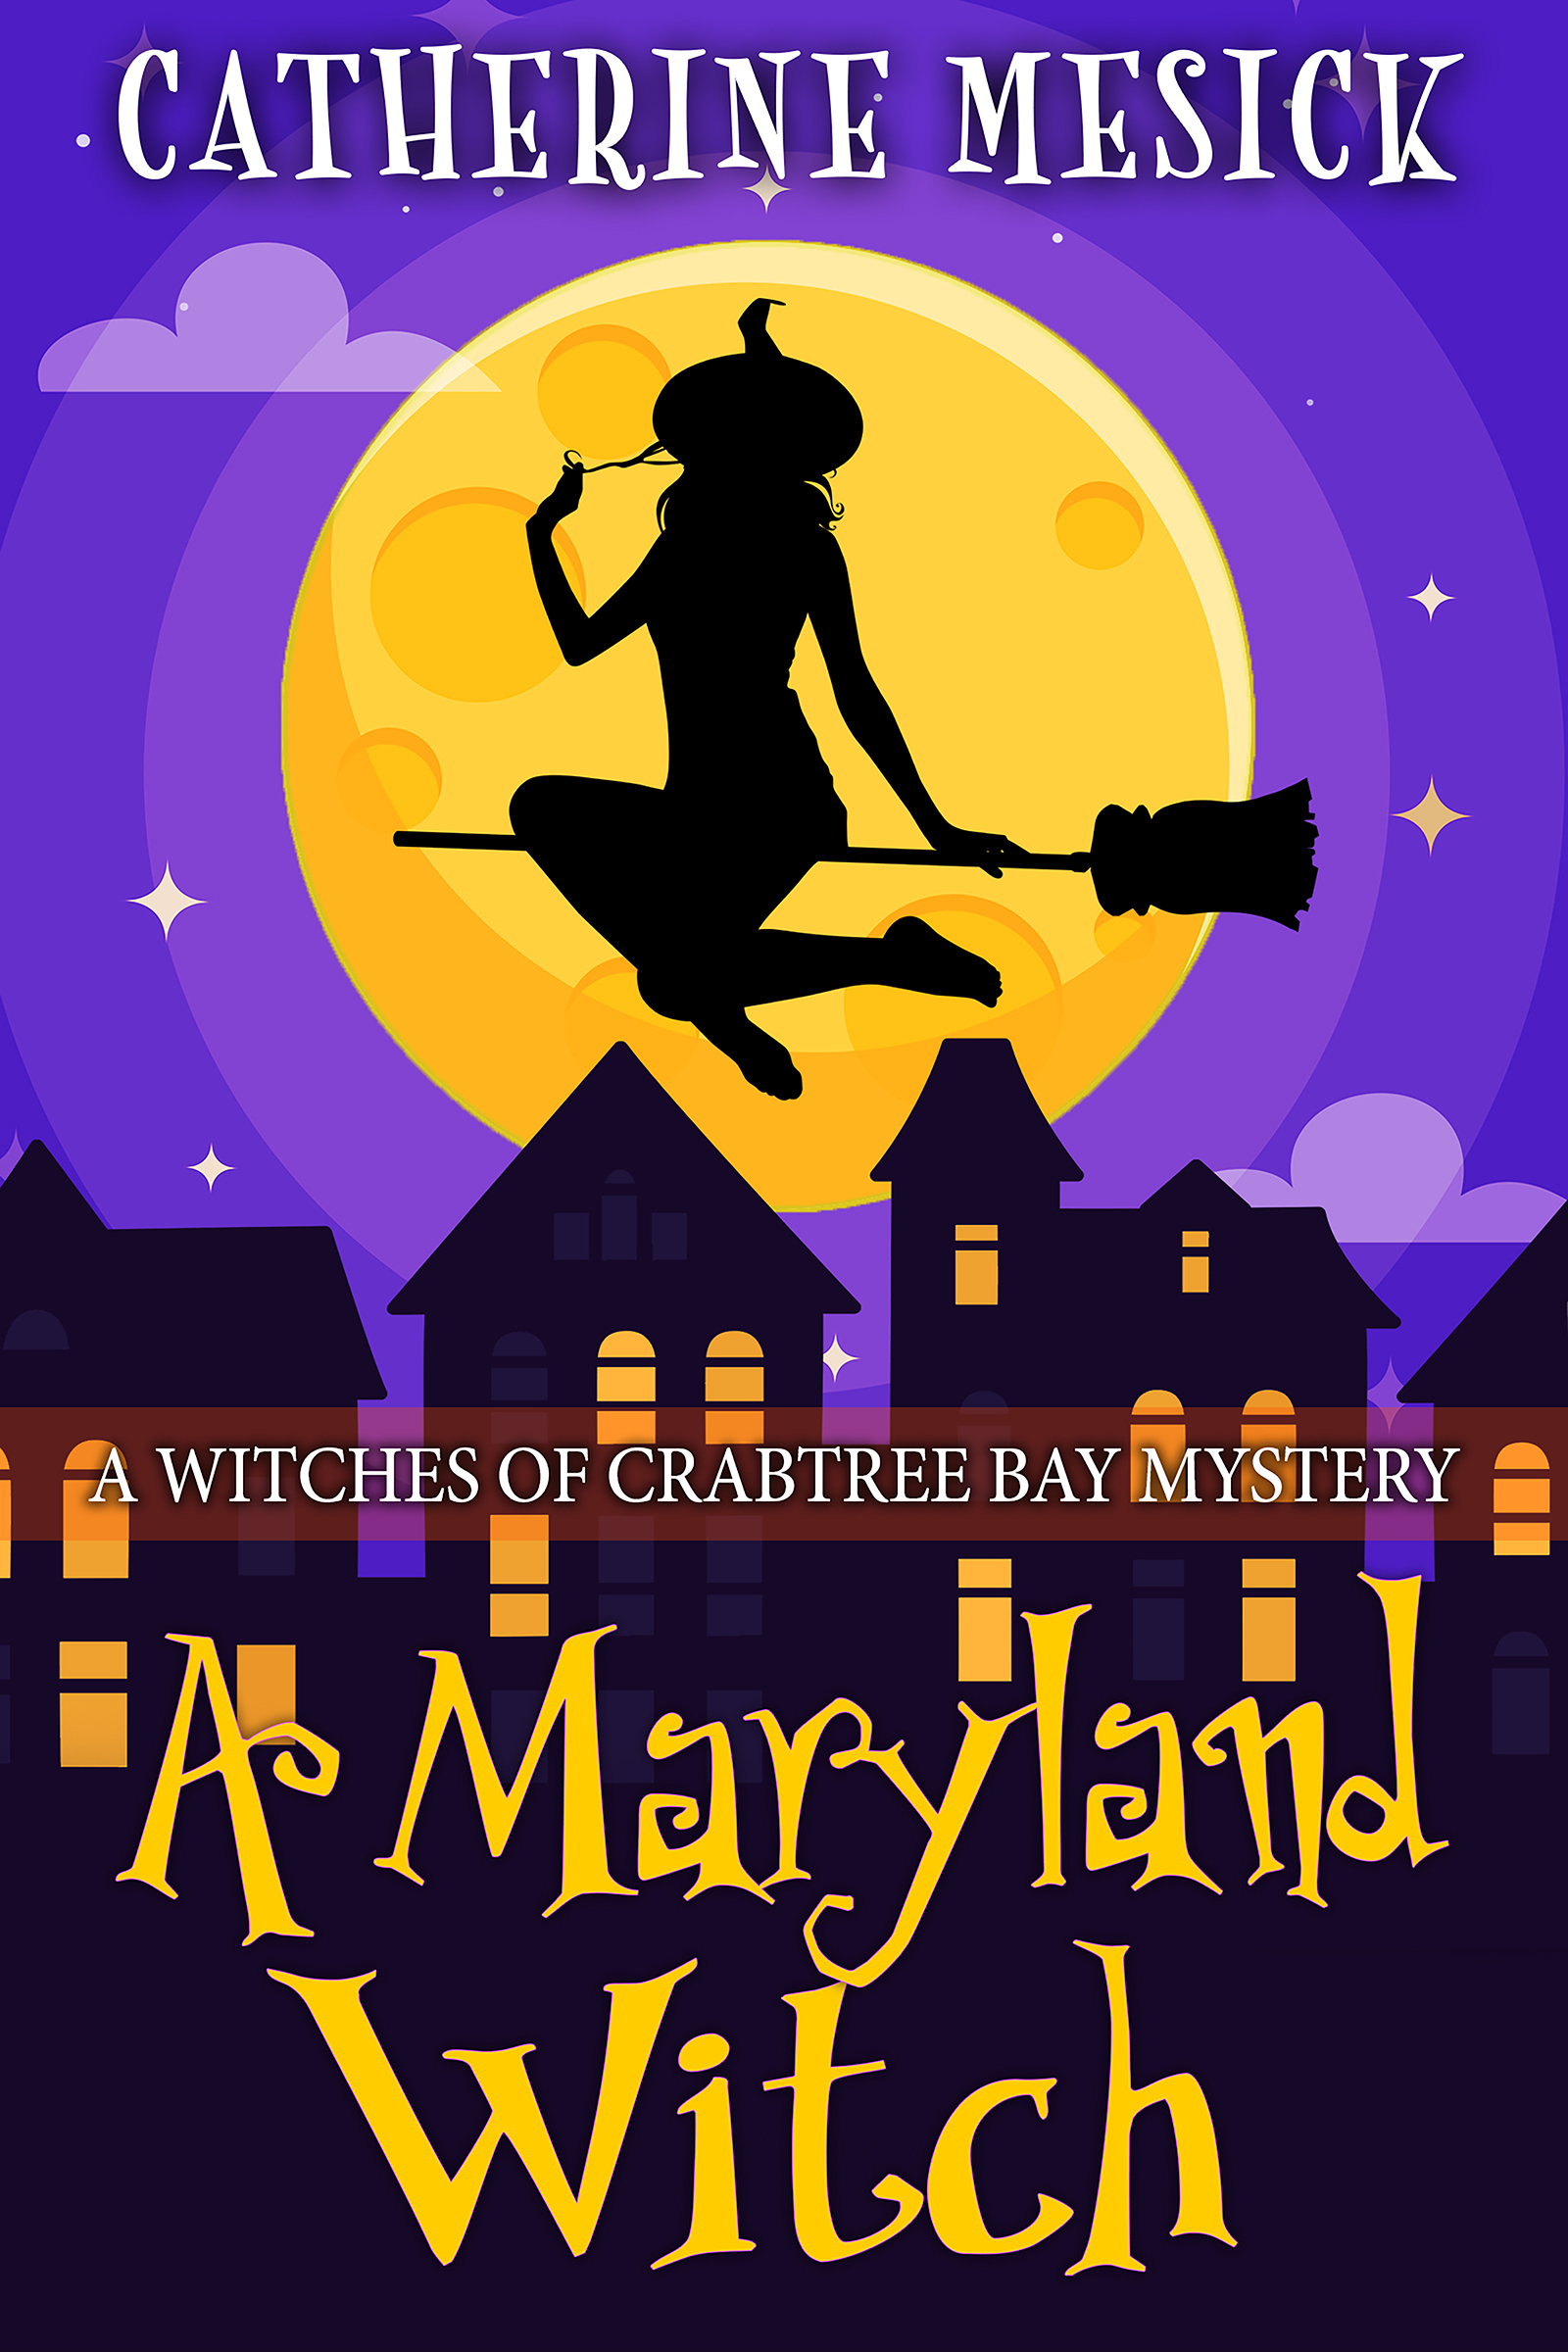 A Maryland Witch OTHER SITES